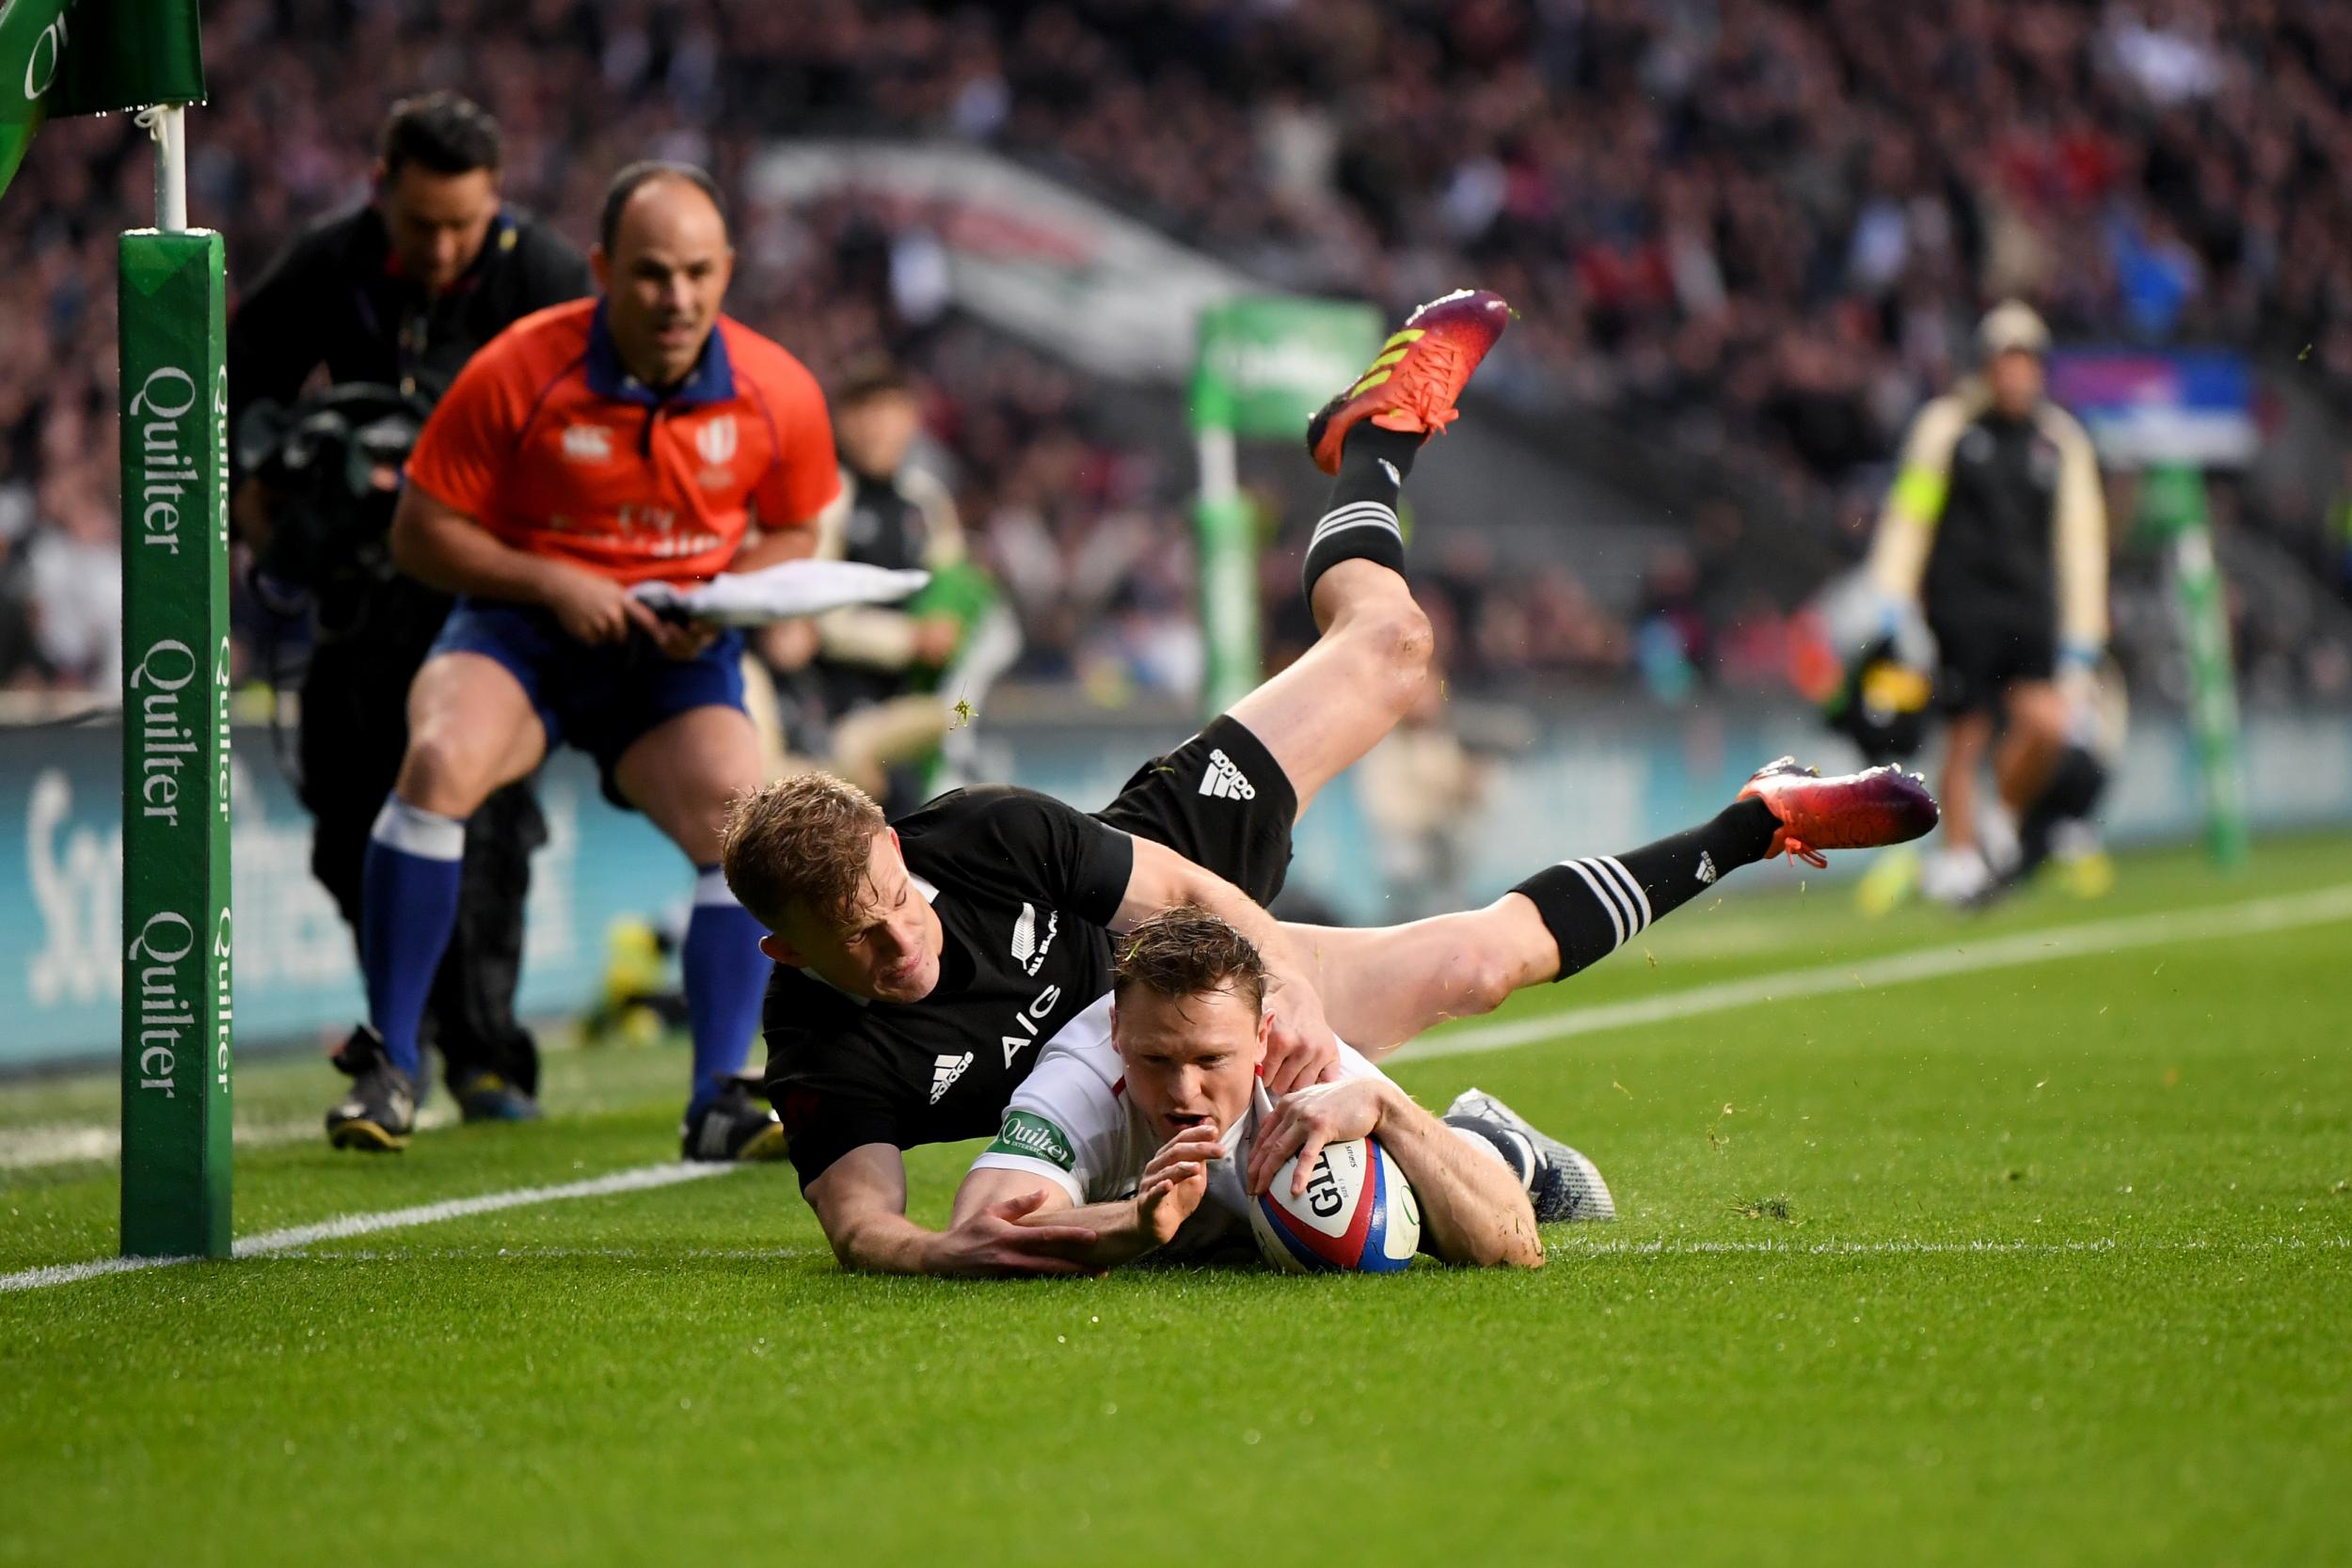 We should have beaten New Zealand last autumn at Twickenham but it wasn't to be